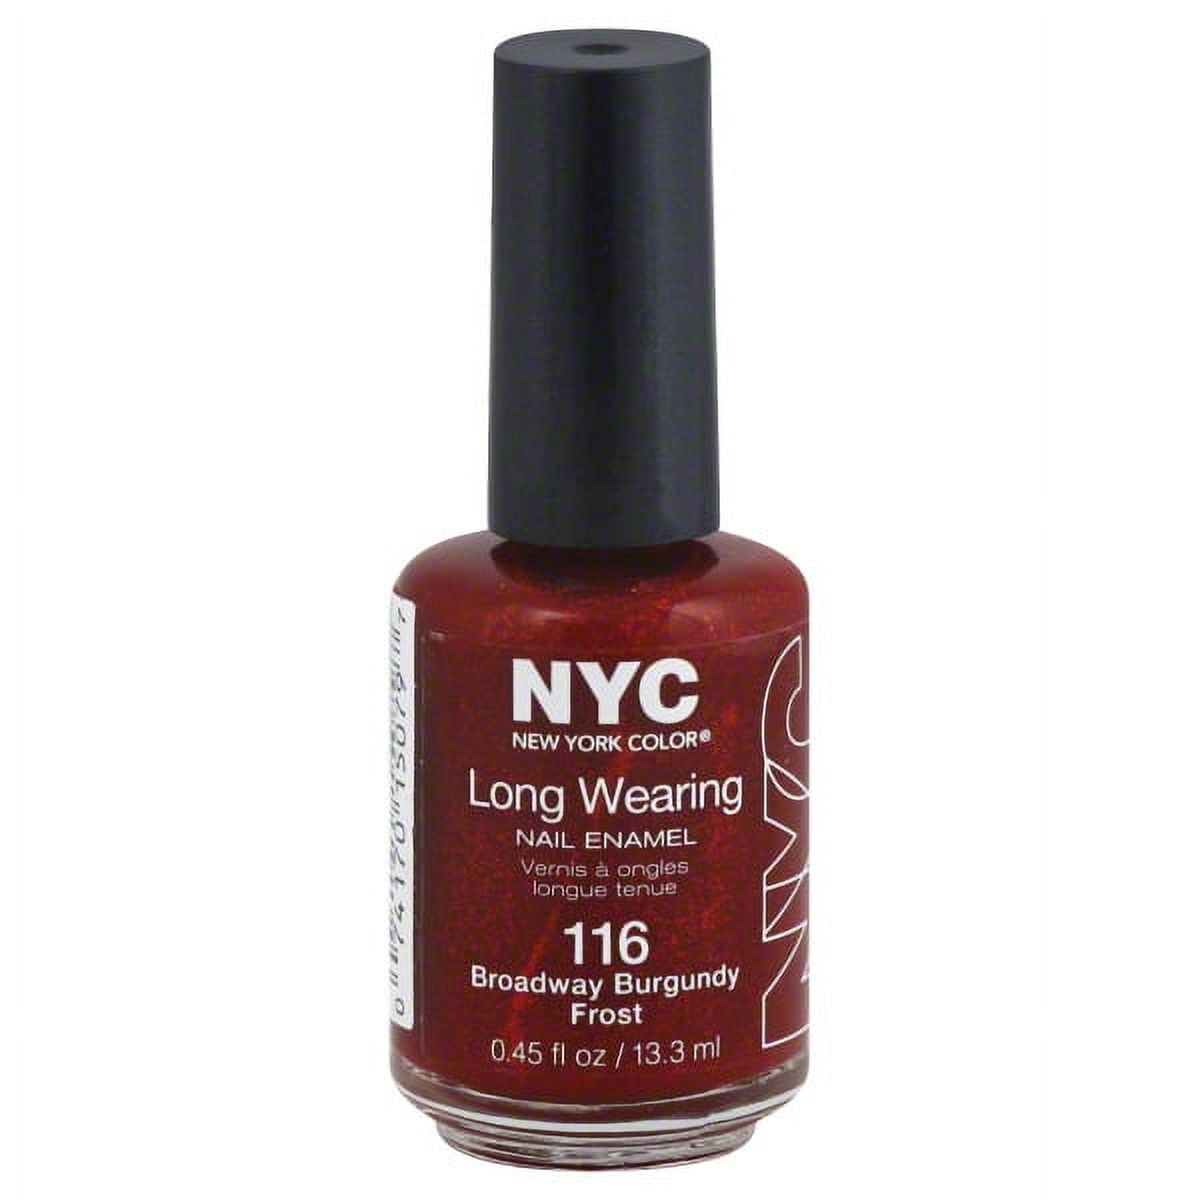 NYC New York Color Long-Wearing Nail Enamel, 116A Broadway Burgundy Frost,  0.45 fl oz 